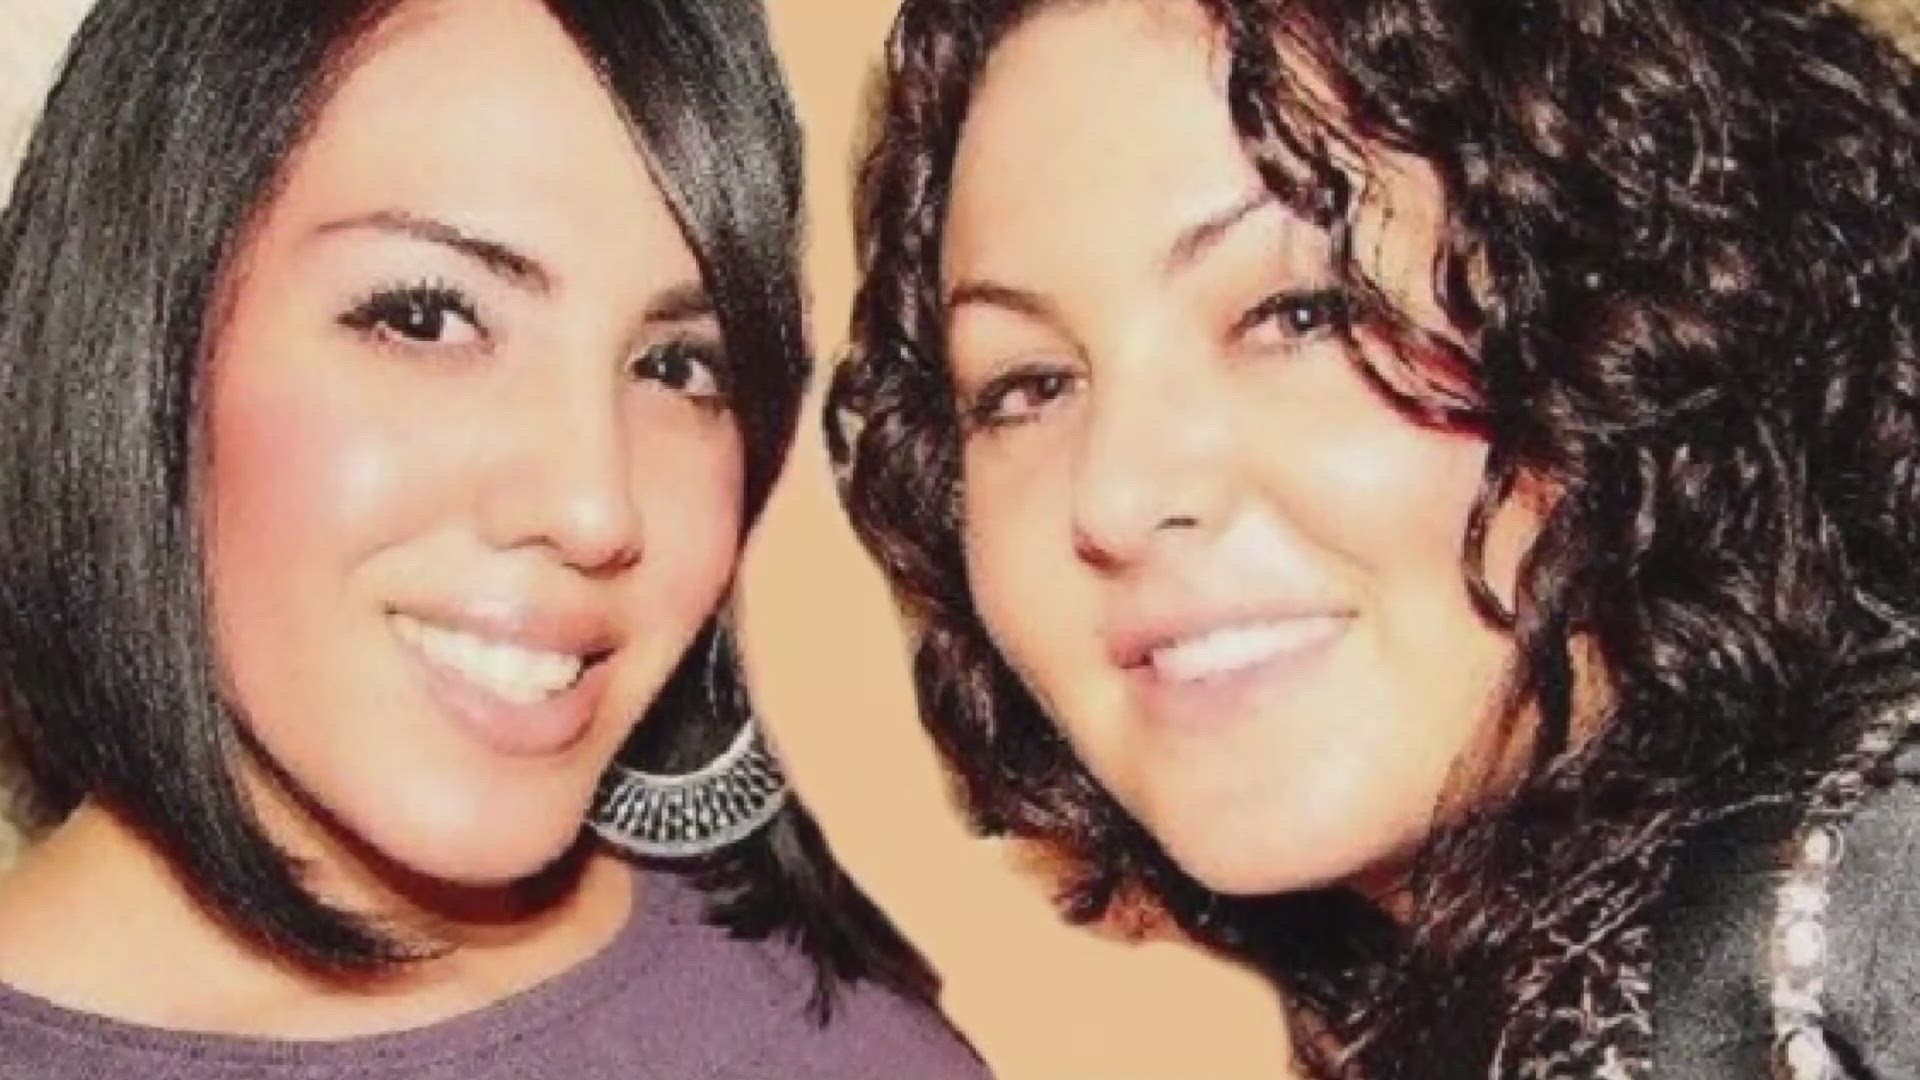 Nicole Glass and Melissa Mason were both strangled to death in their Phoenix home in 2010. Their families aren't giving up on their search for the killer.